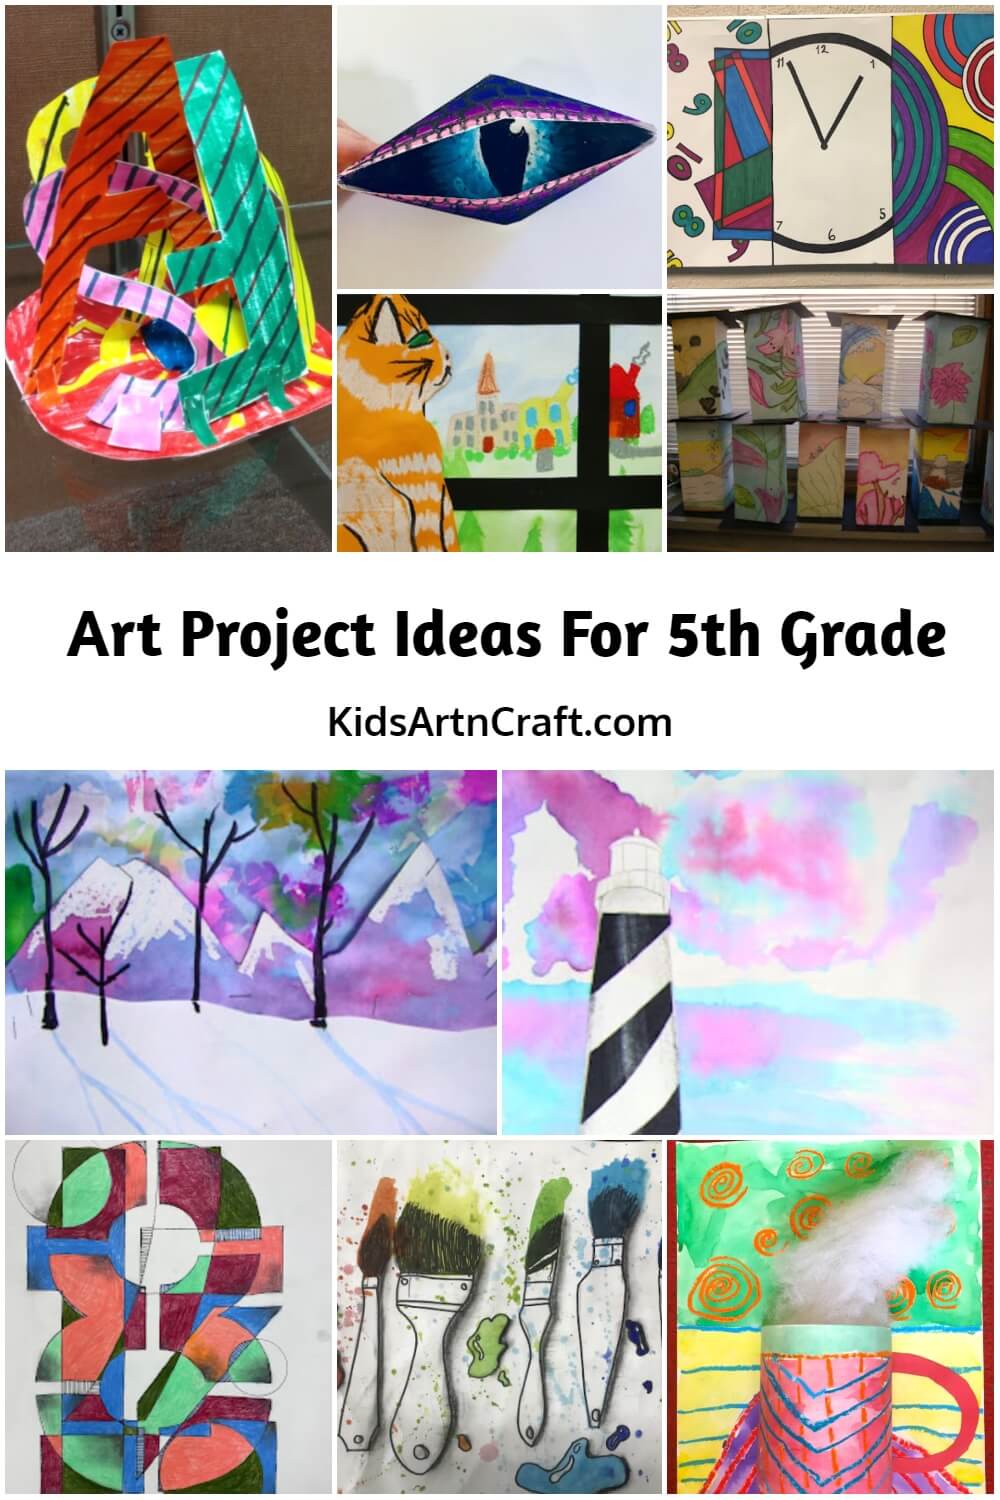 Art Project Ideas for 5th Grade